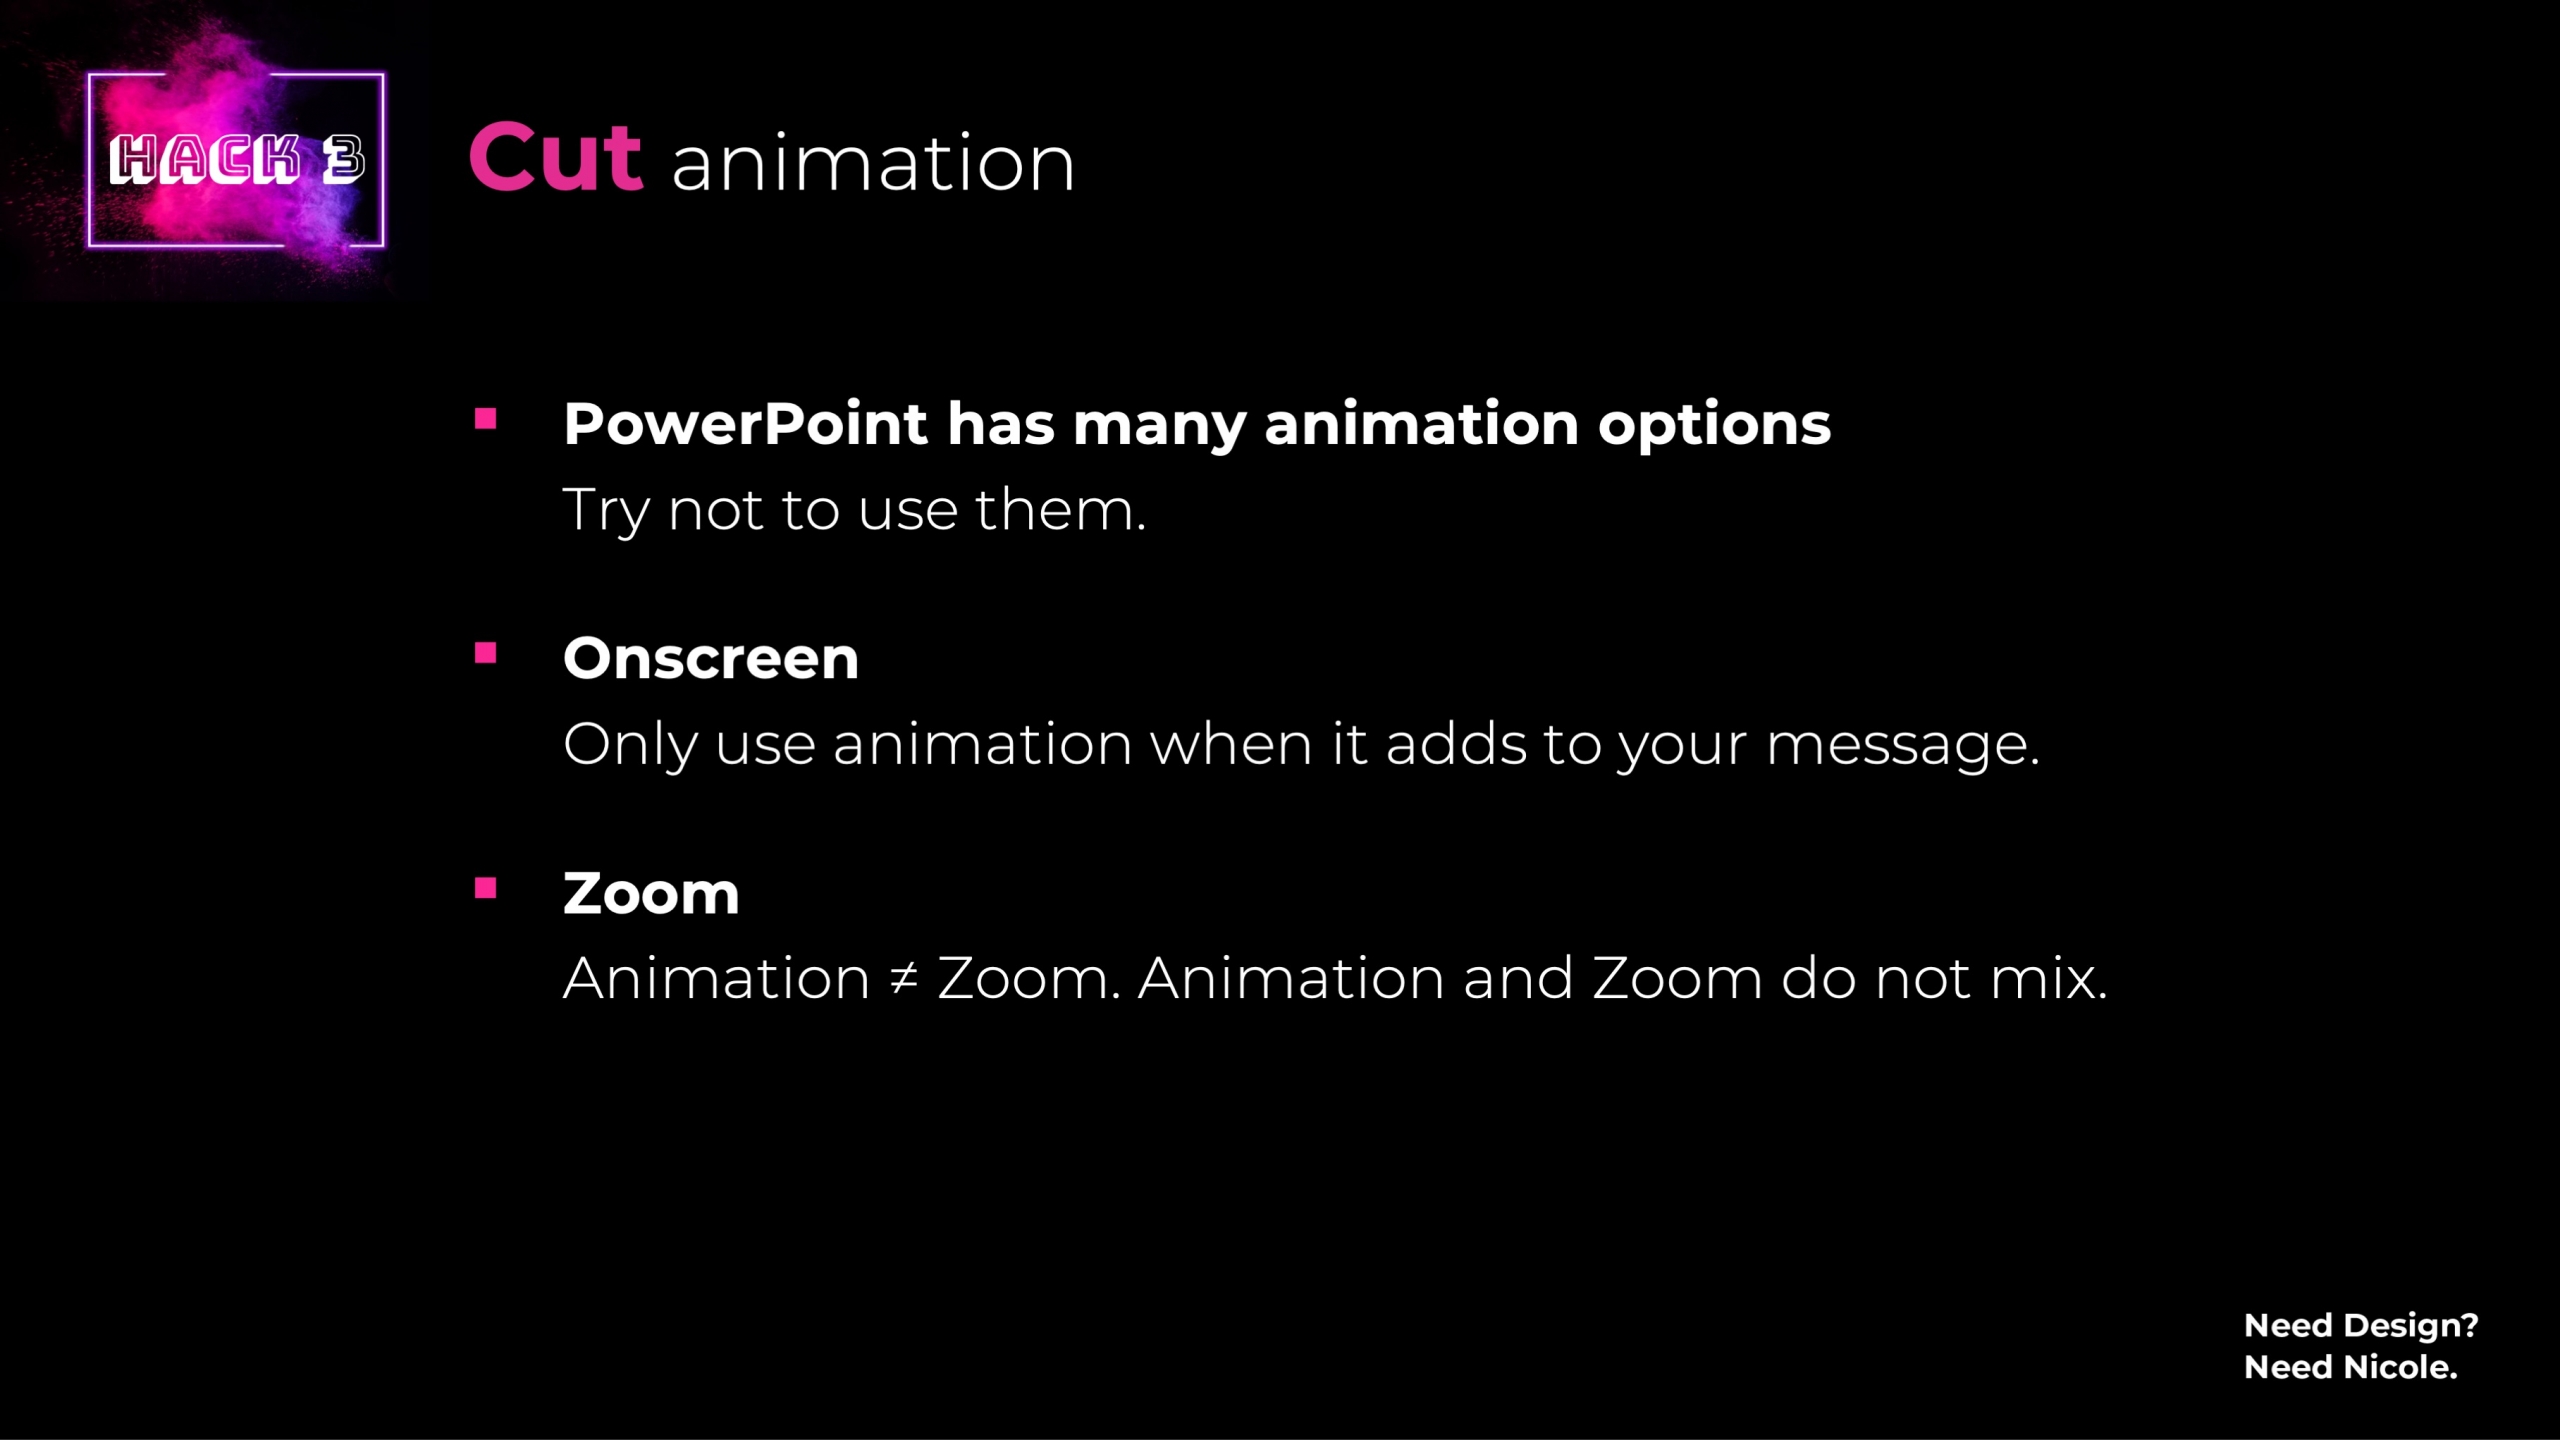 Cut animation PowerPoint has many animation options Try not to use them. Only use animation when it adds to your message. Animation ≠ Zoom. Animation and Zoom do not mix.